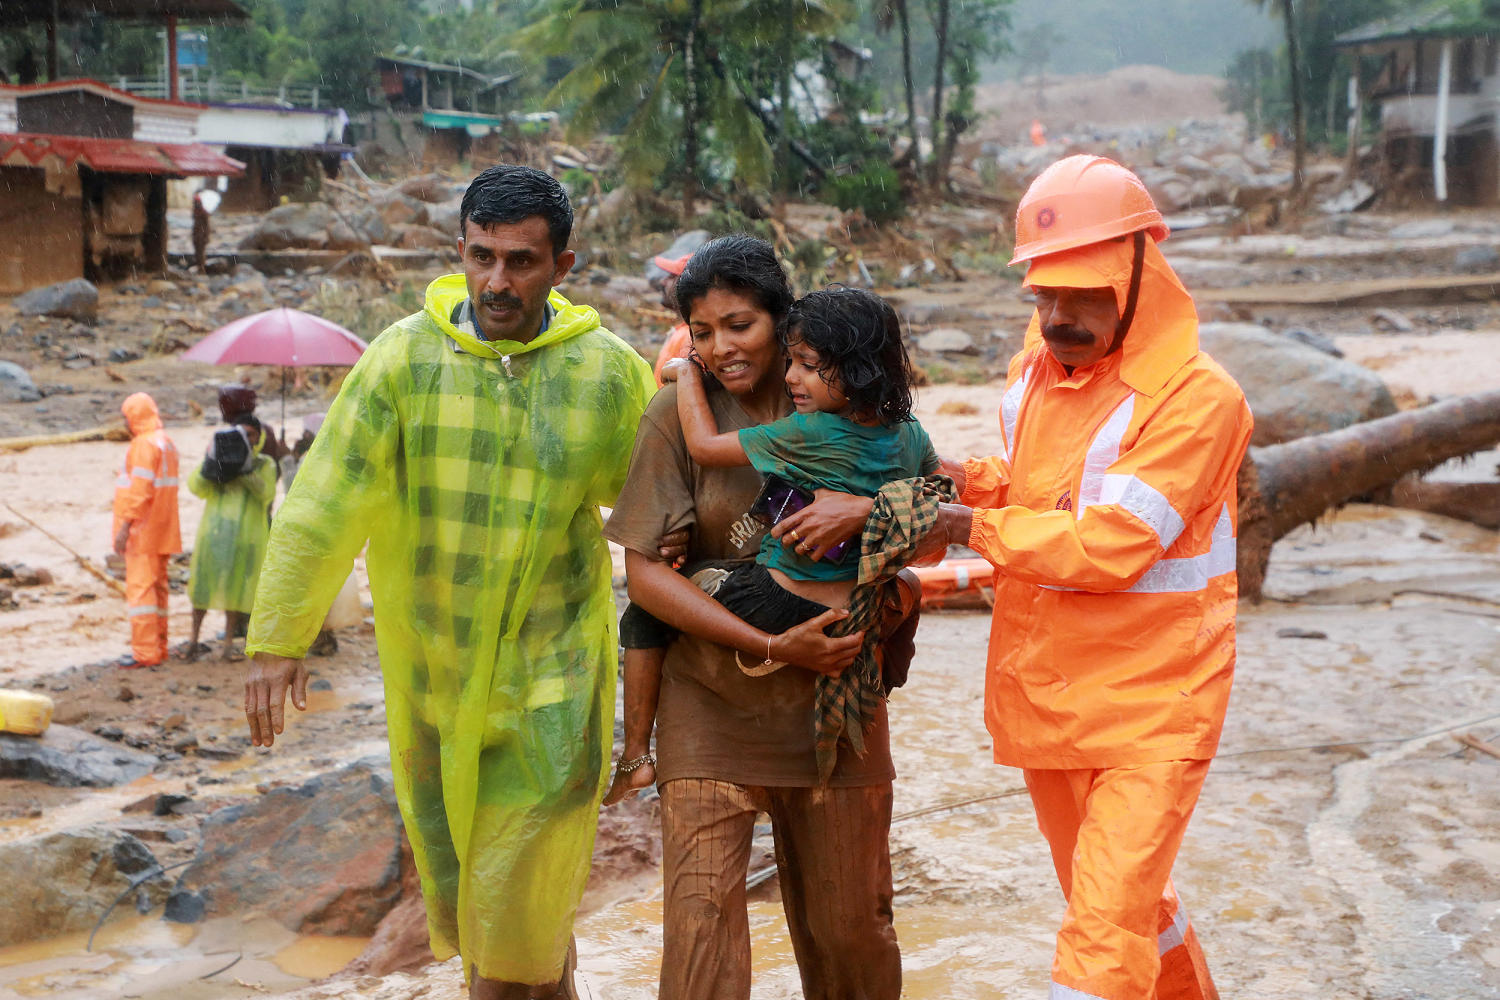 Landslides caused by heavy rains kill 24 and bury many others in southern India